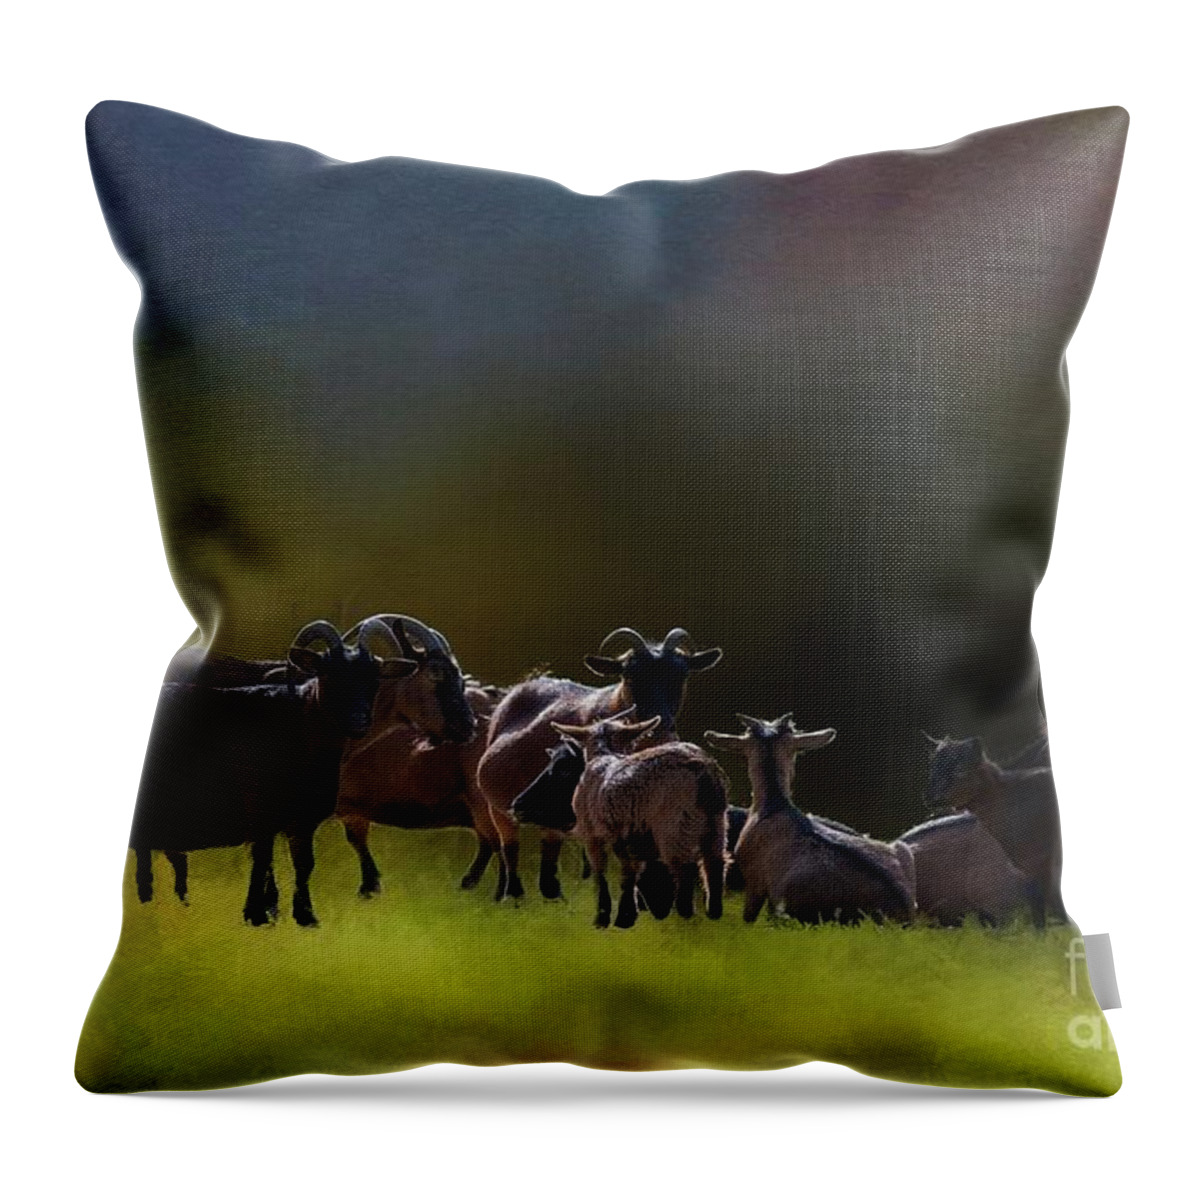 Pygmy Goats Throw Pillow featuring the painting Pygmy Goats by Eva Lechner